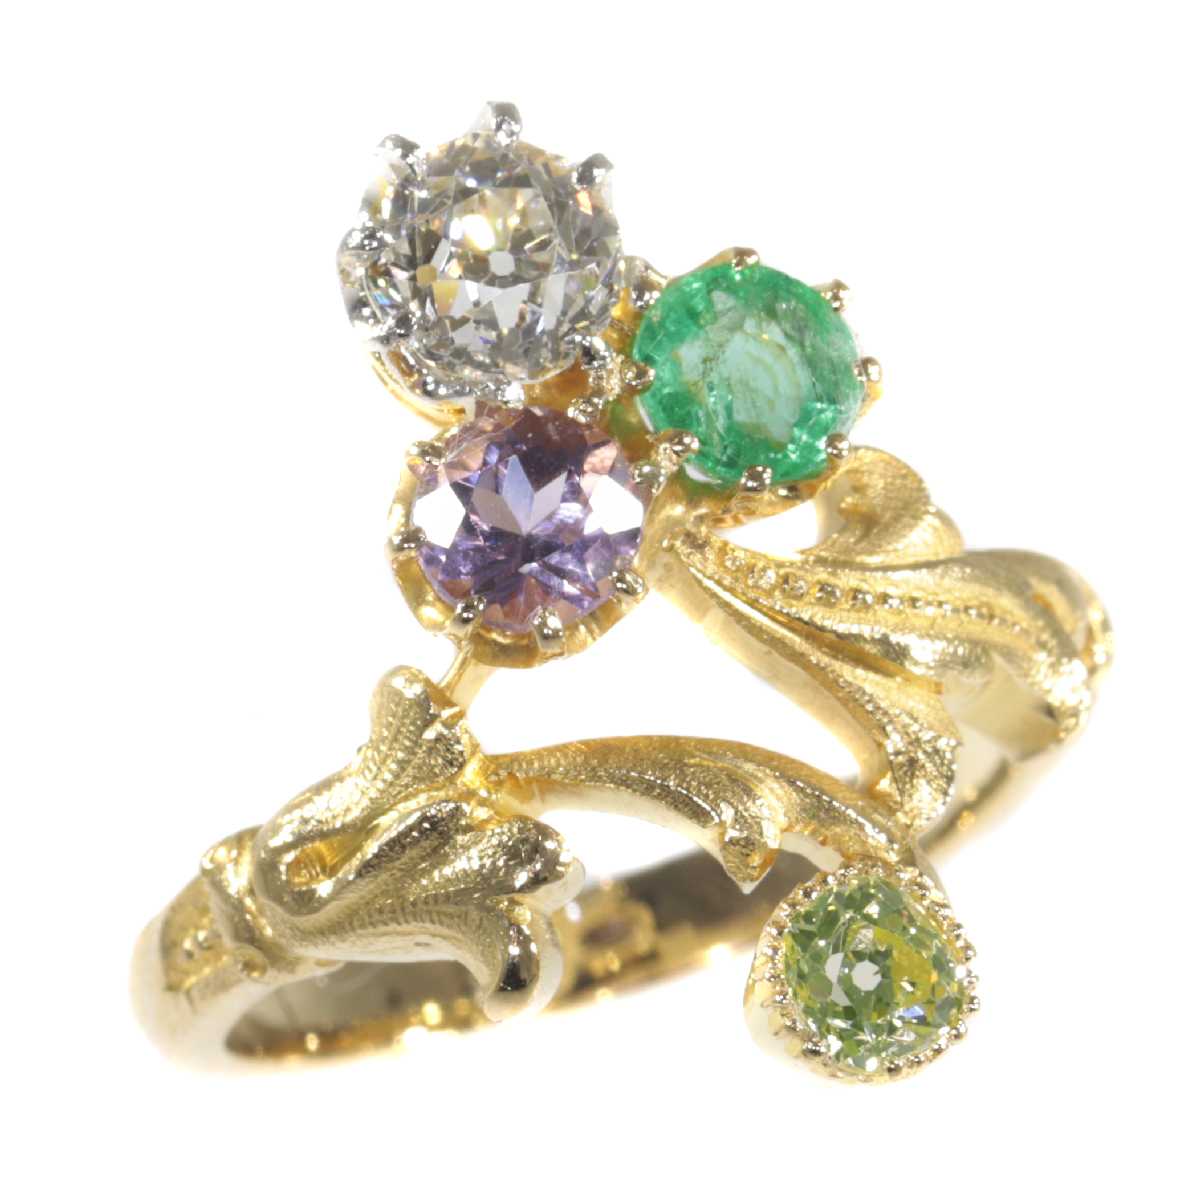 Antique ring typical so-called Suffragette diamond ring with precious stones